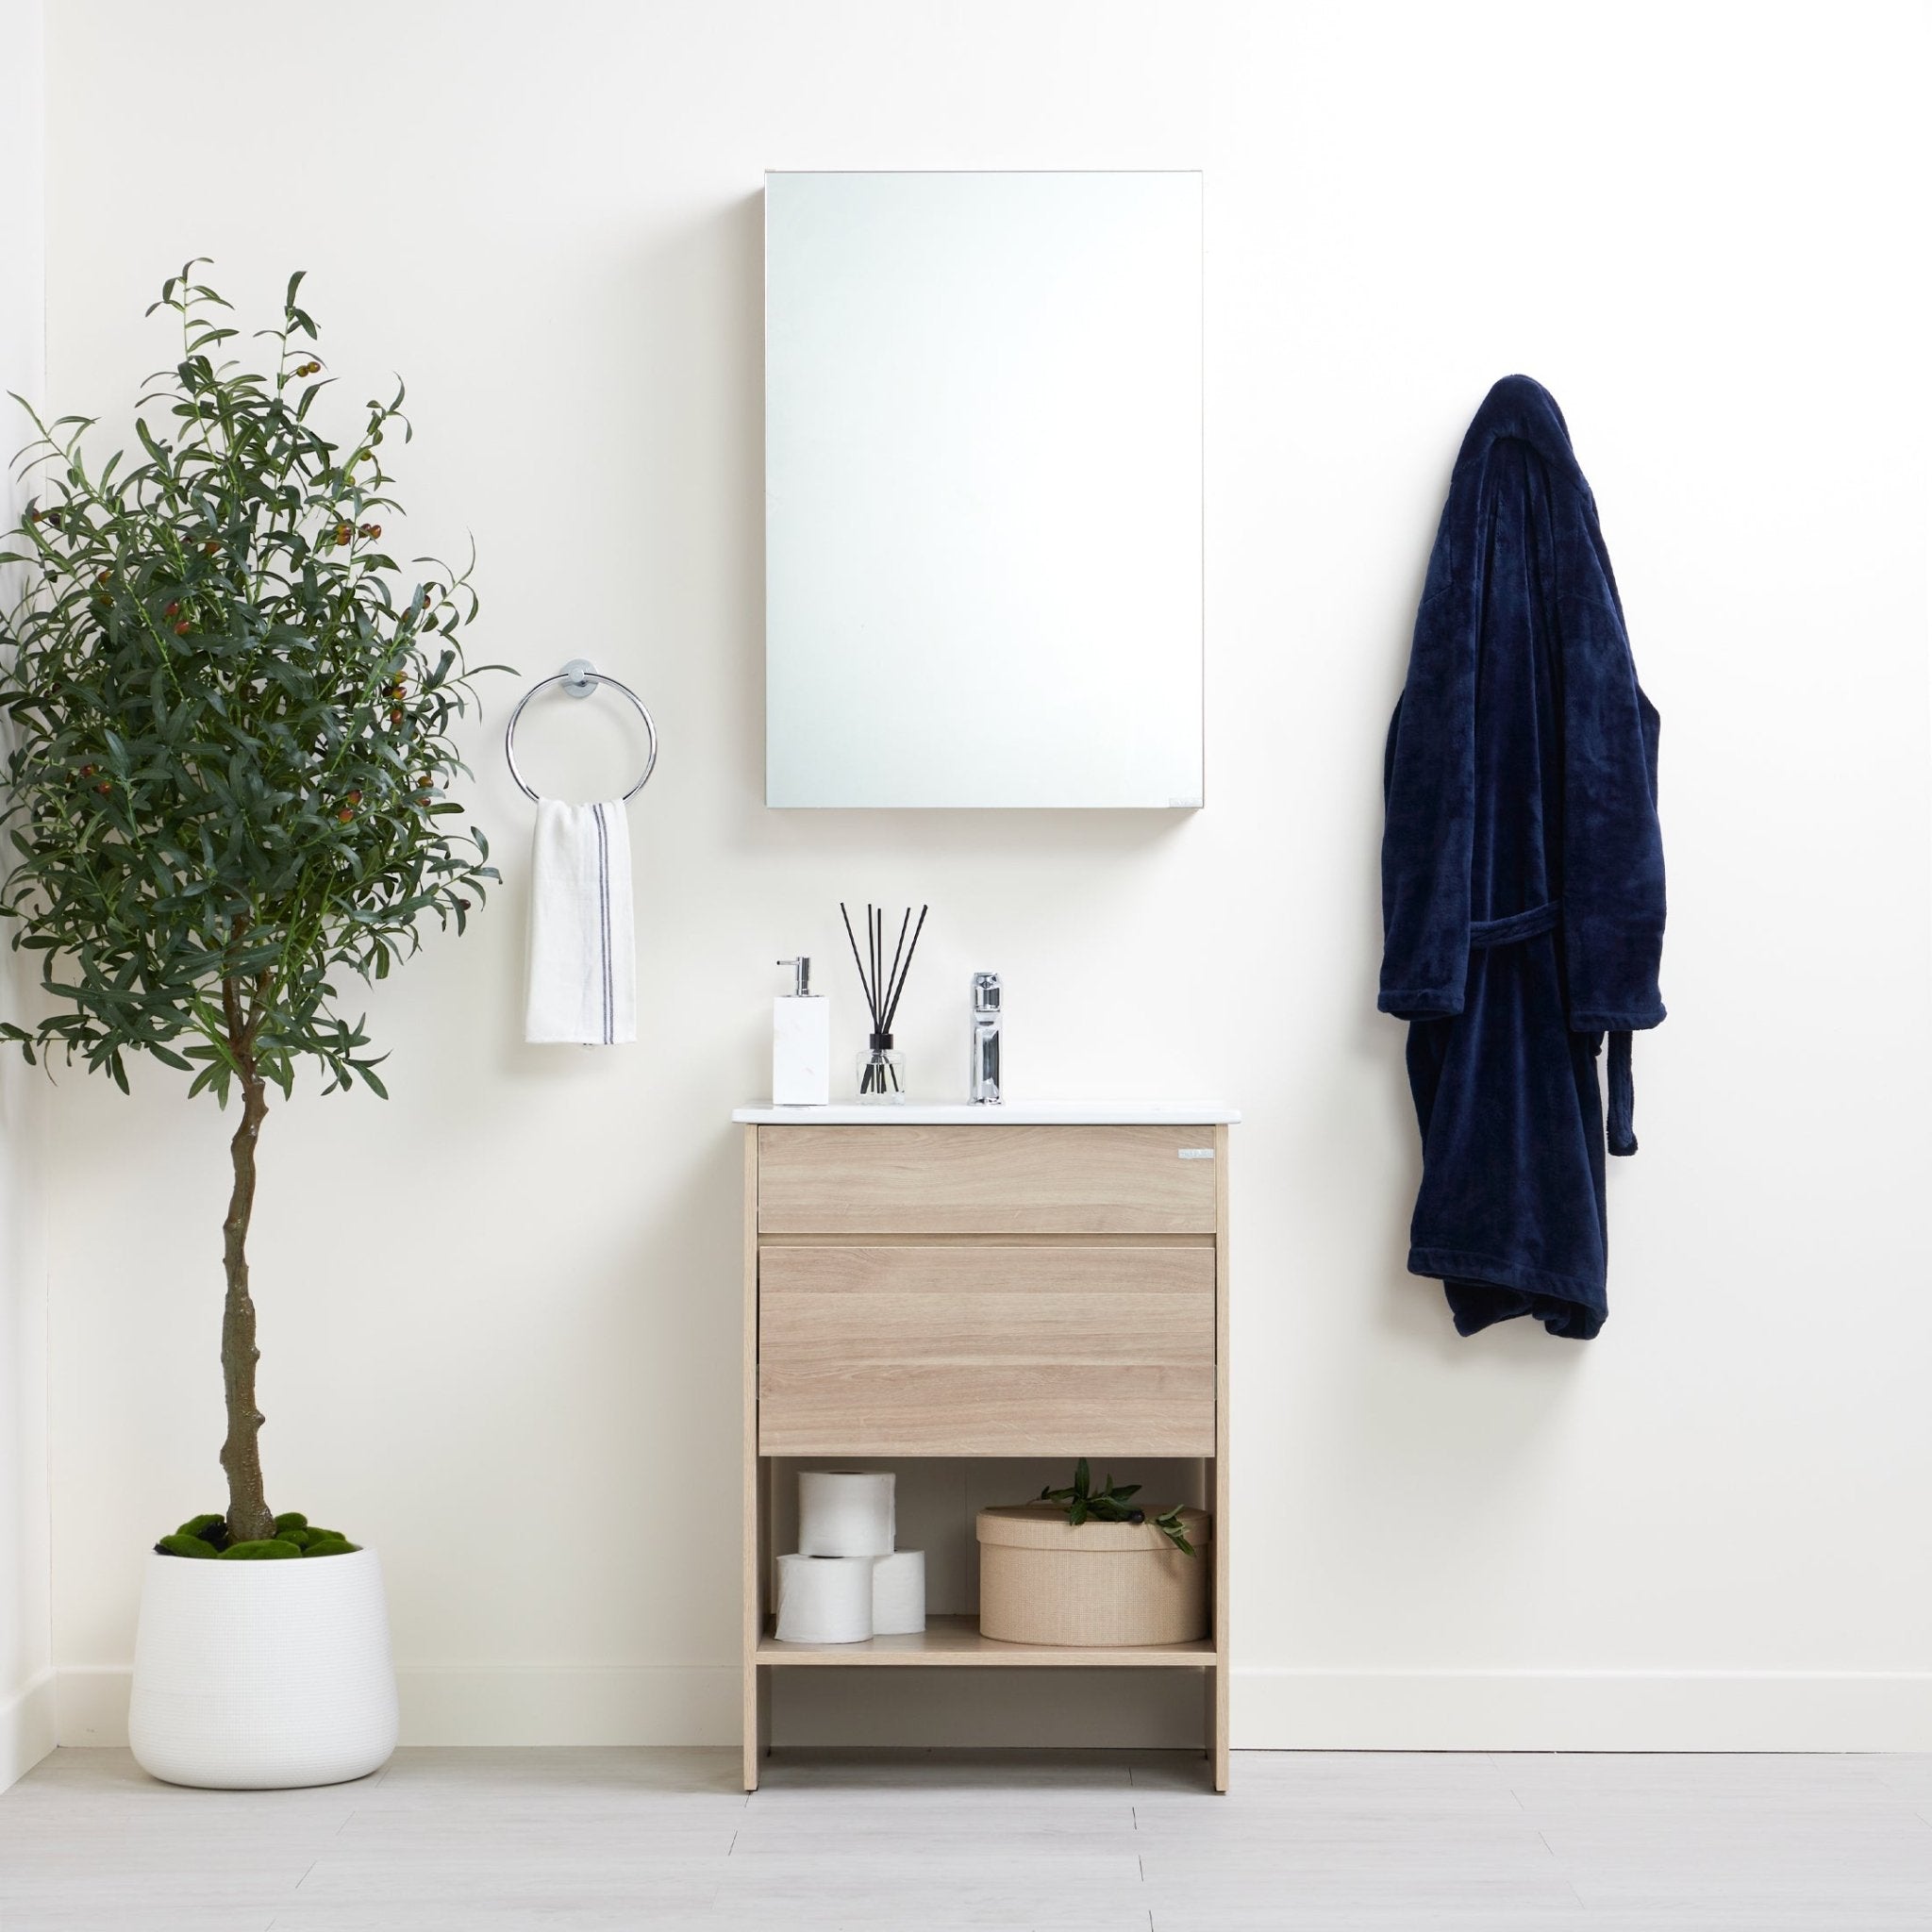 Zeno Bathroom Vanity Set, front-facing with bathroom décor & toiletries on counter and in cabinets